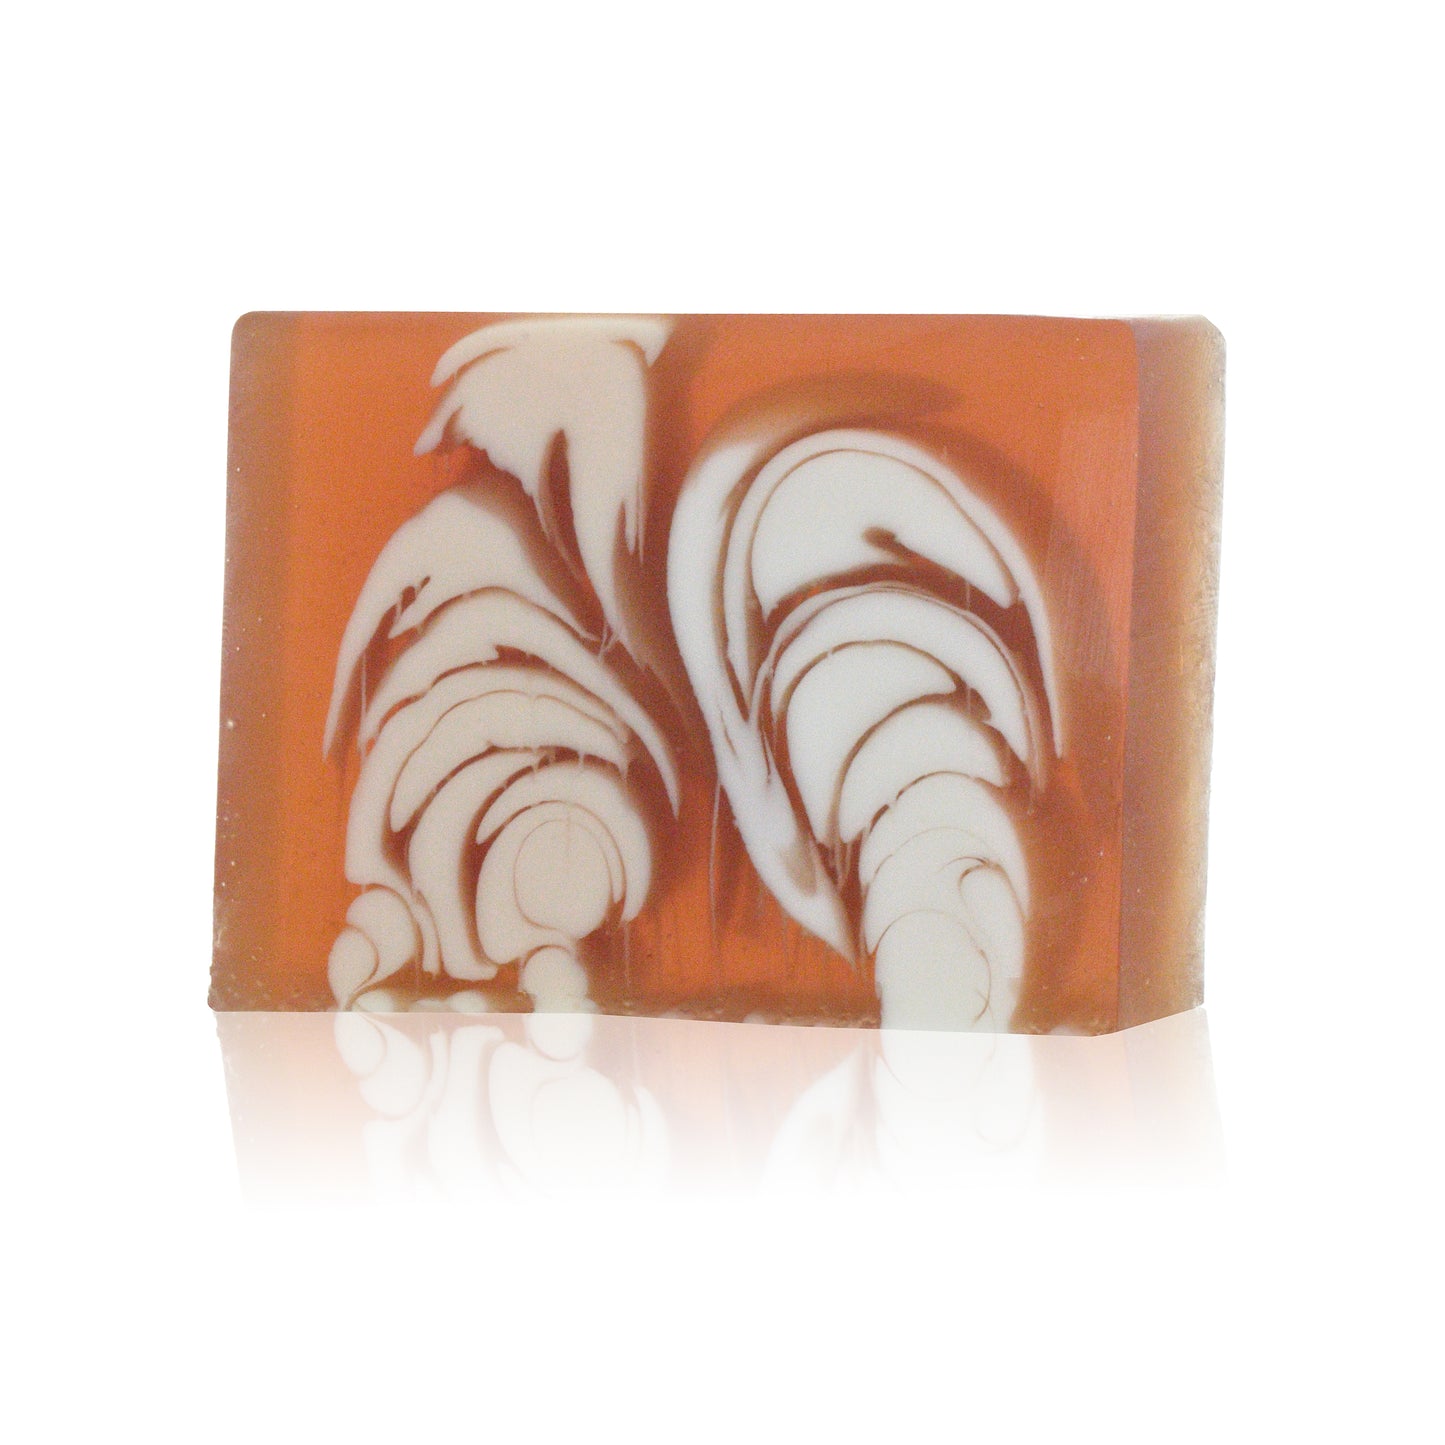 Handcrafted Soap Slice 100g - Almond